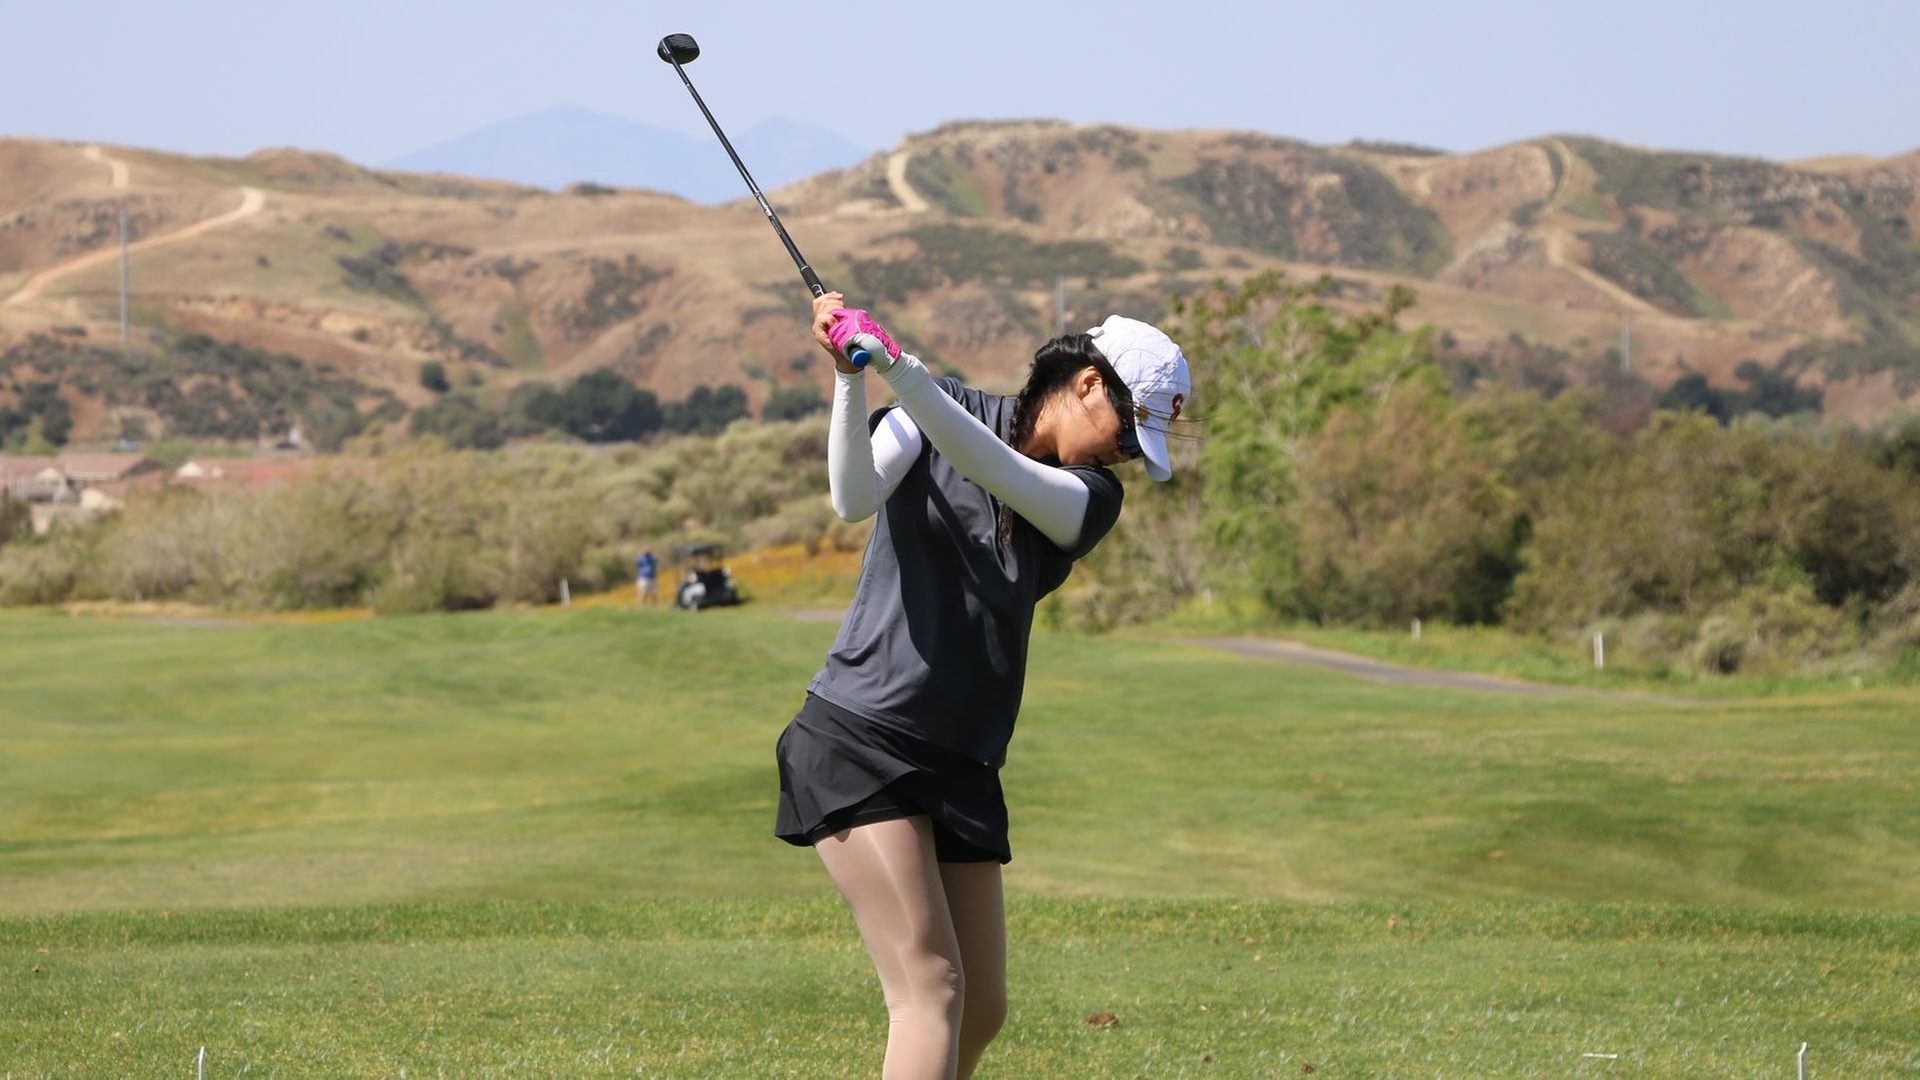 Tiffany Hu tied for team-high honors at +3